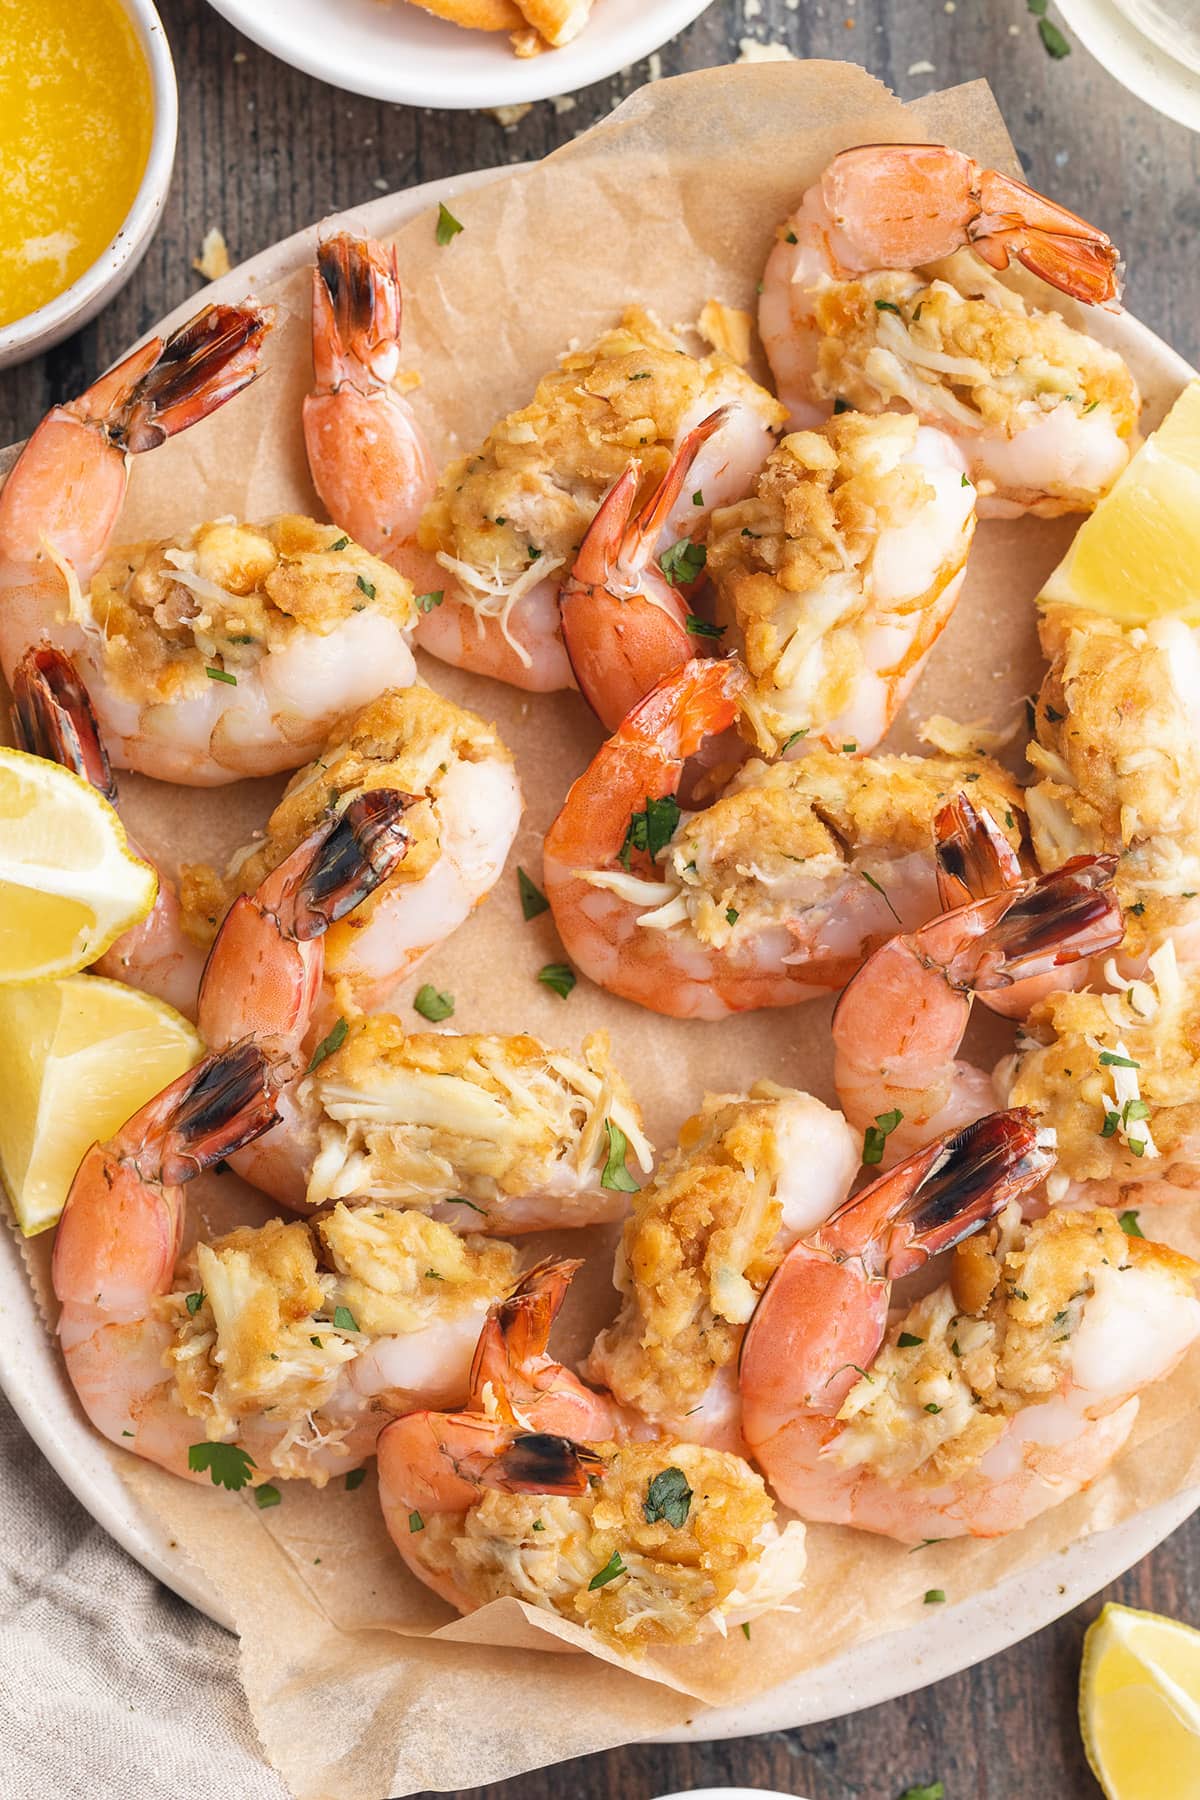 Top-down photo of a plate of baked, stuffed shrimp with lemon wedges and fresh herbs.